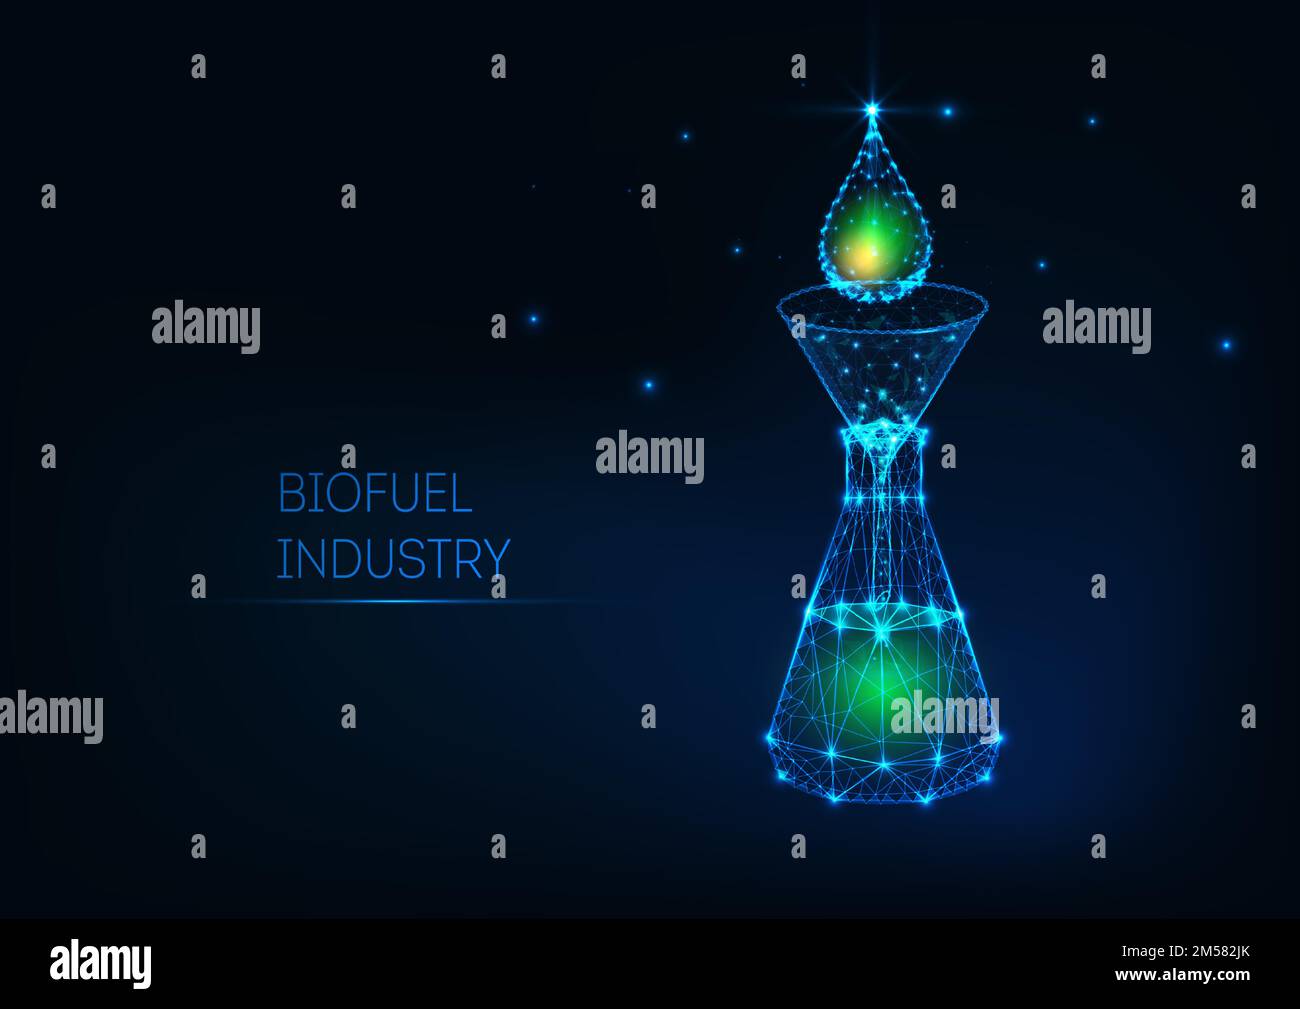 Futuristic design biofuel industry concept with glowing low polygonal green petroleum drop, laboratory funnel, flask isolated on dark blue background. Stock Vector